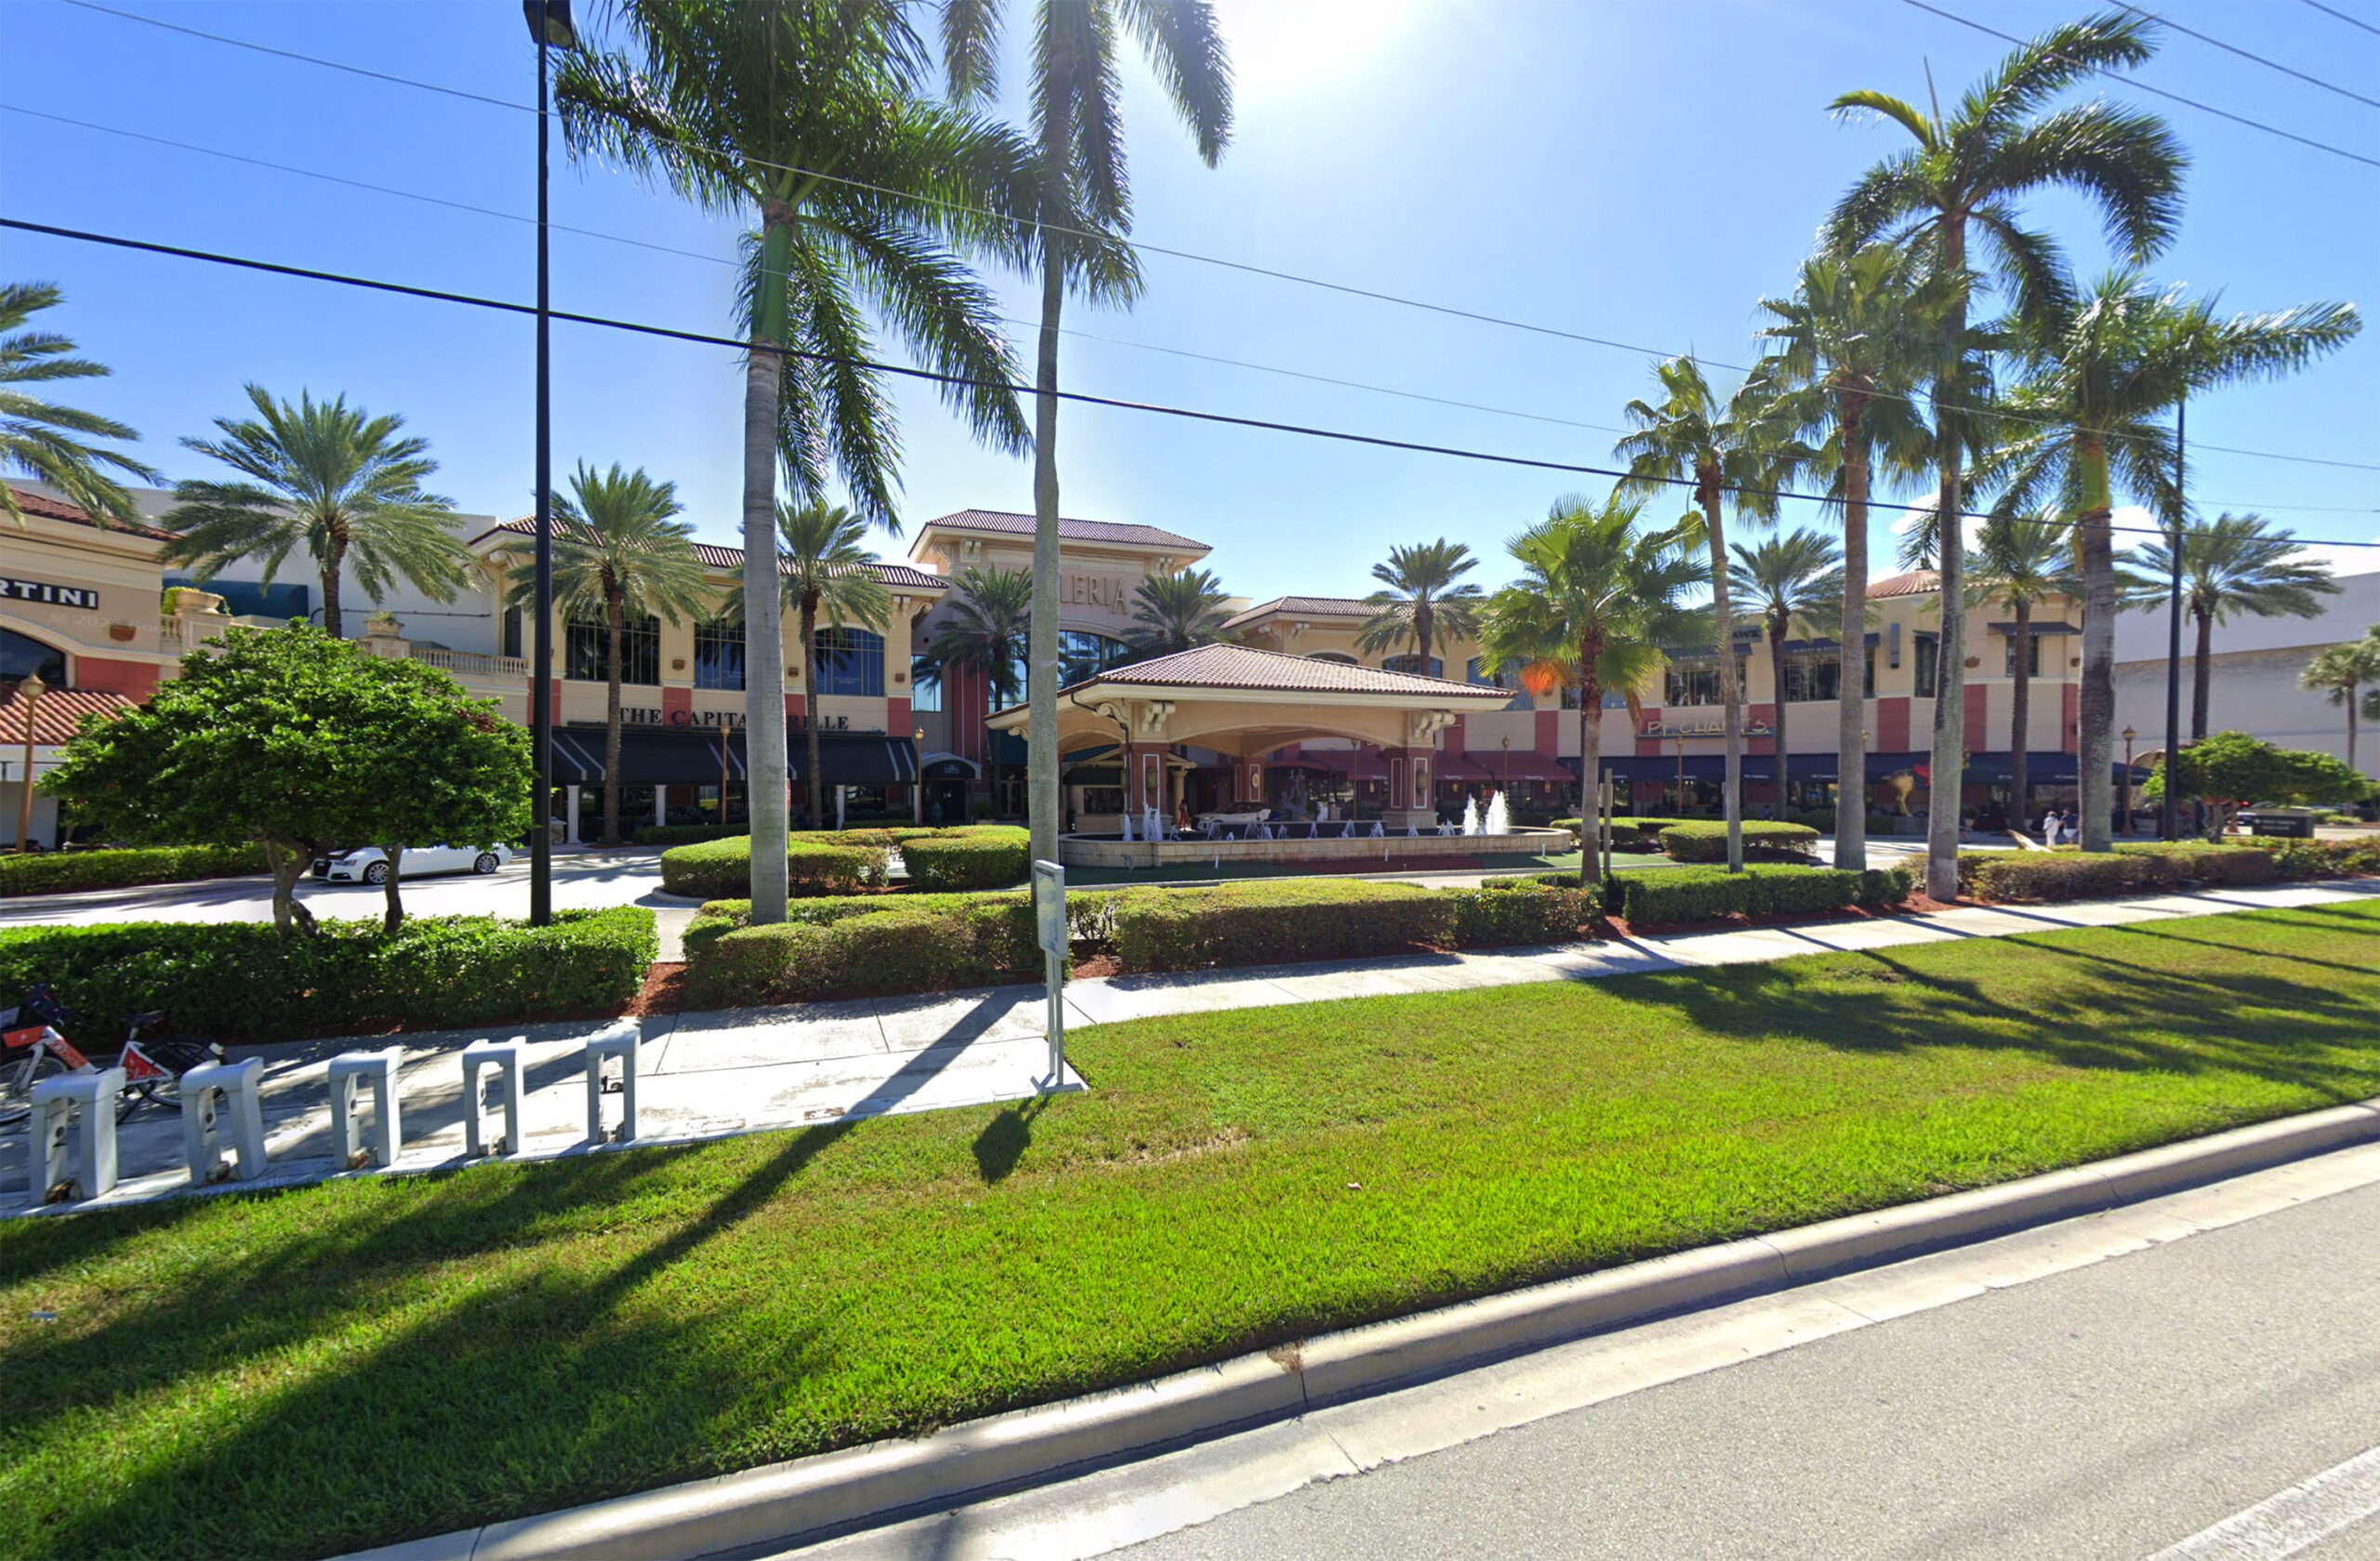 Galleria Fort Lauderdale Mall Listed for Sale with Anticipated Sale Price Exceeding $100 Million